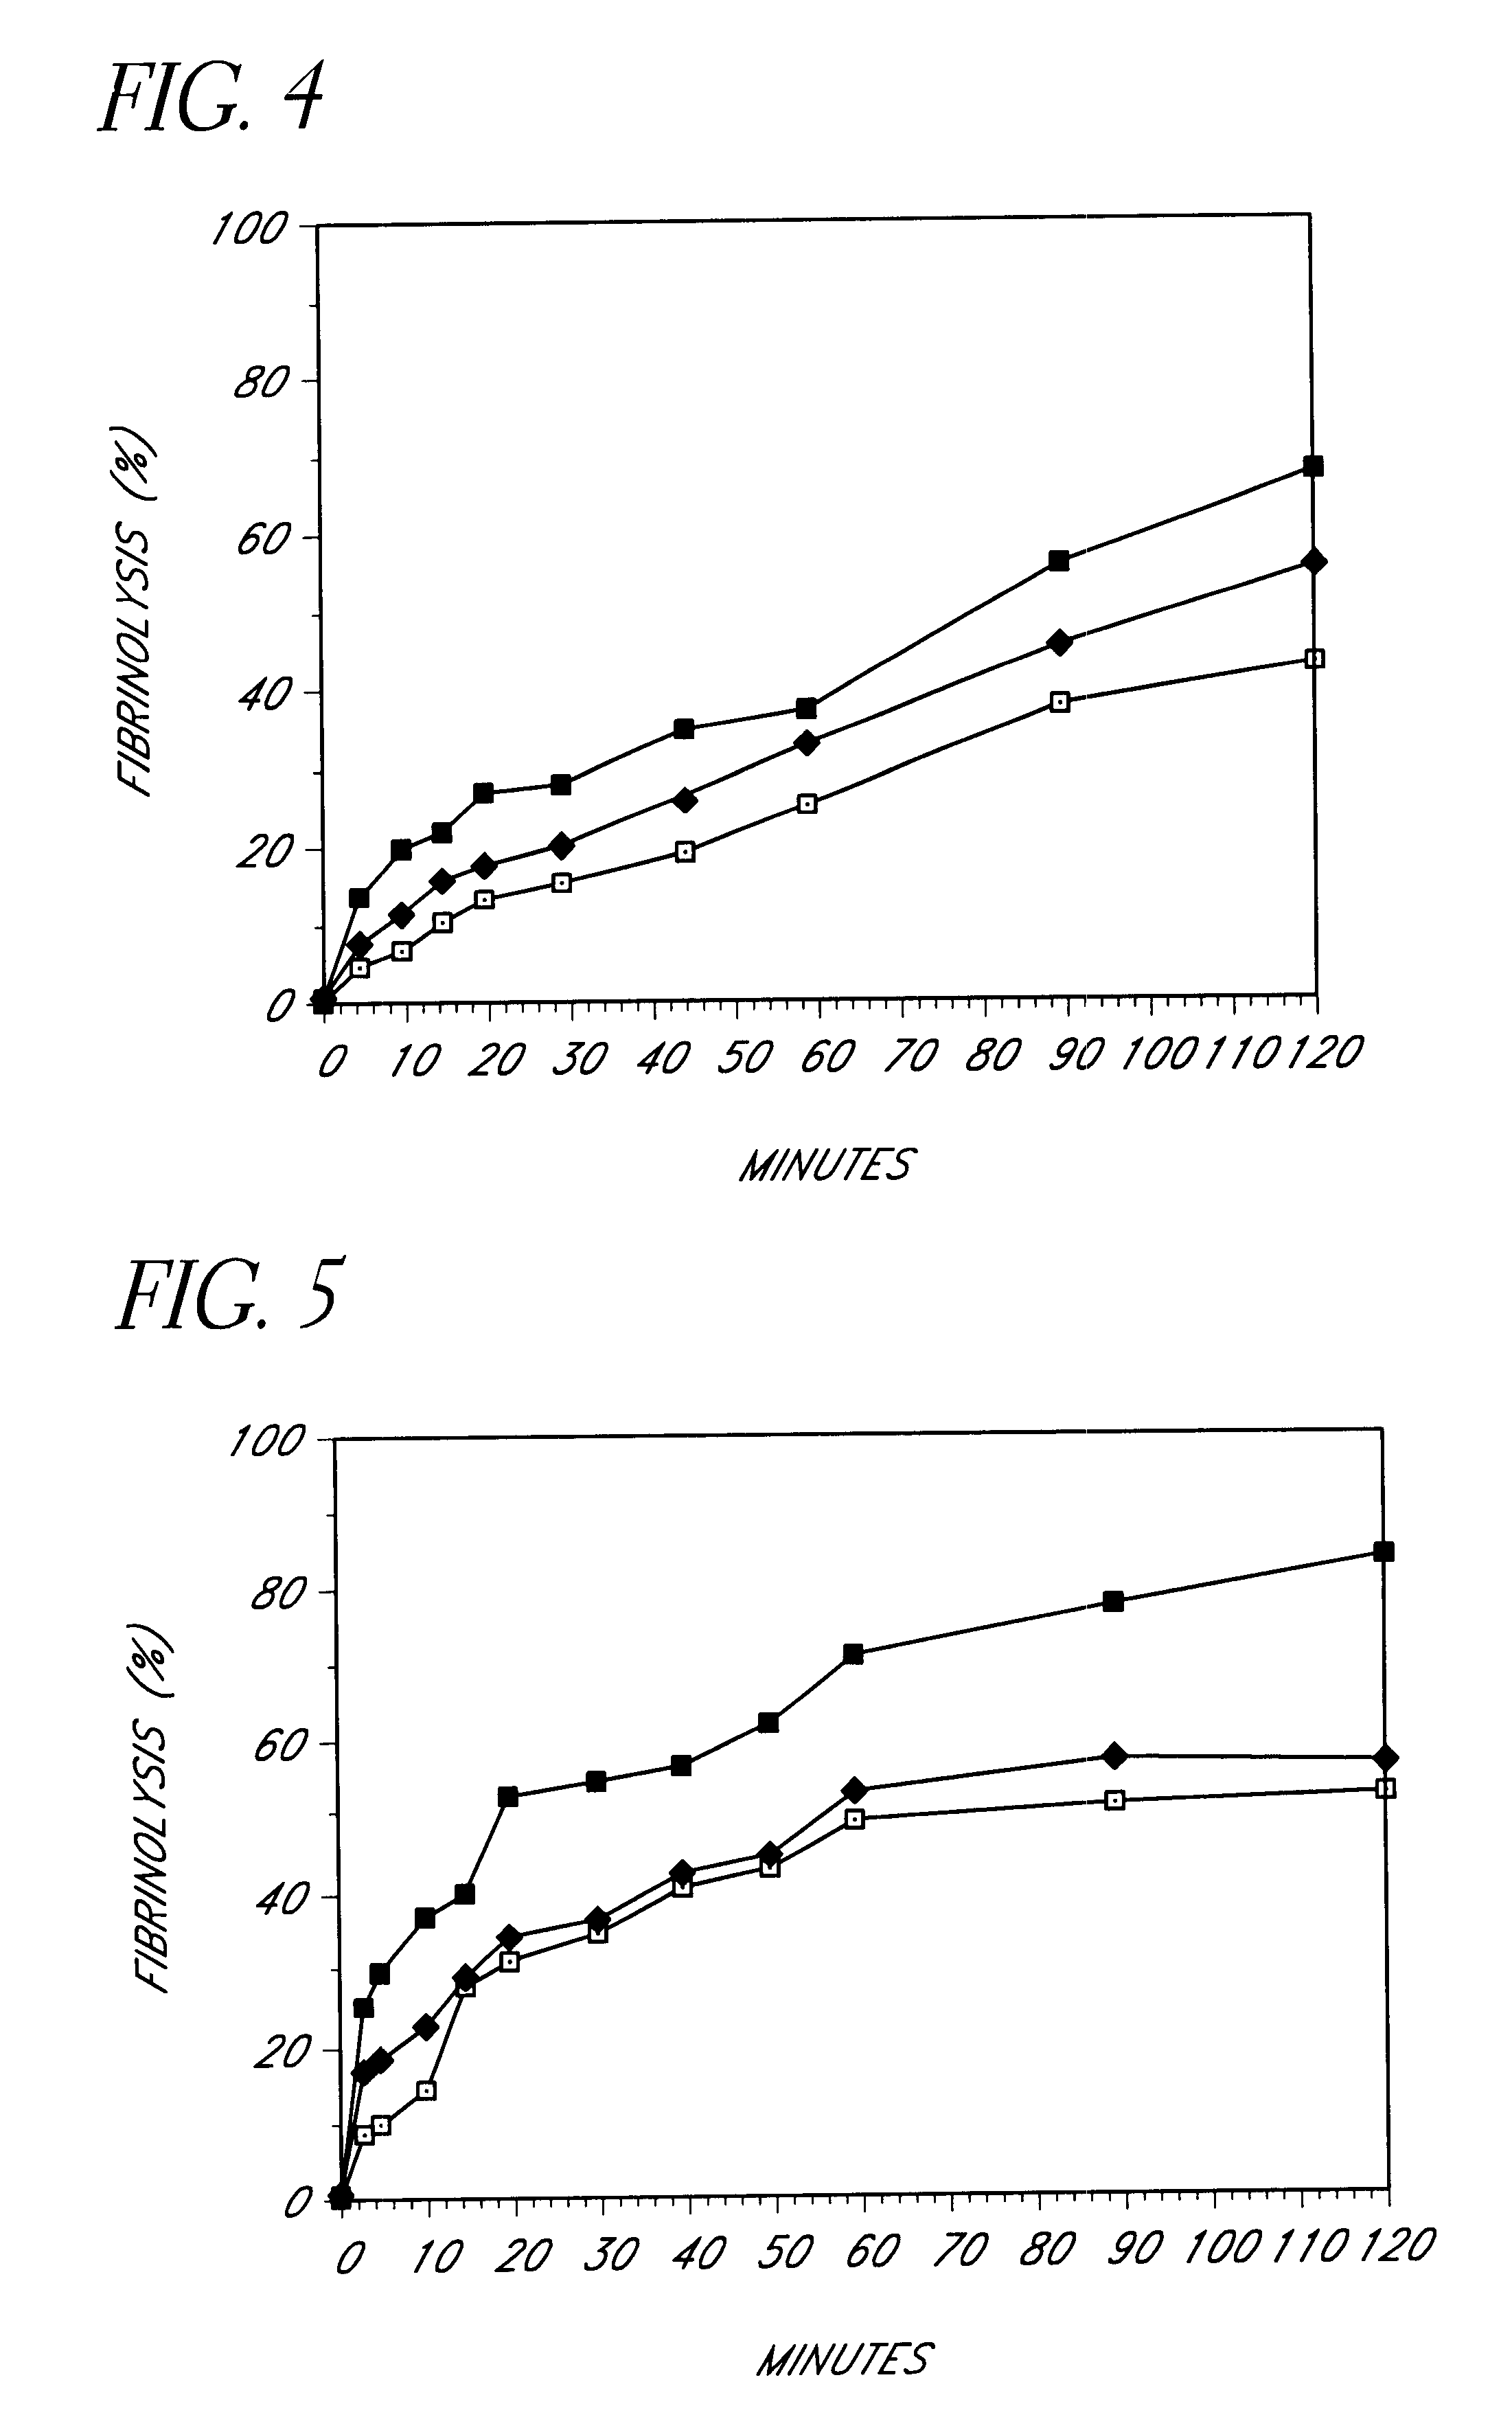 Booster for therapy of disease with ultrasound and pharmaceutical liquid composition containing the same